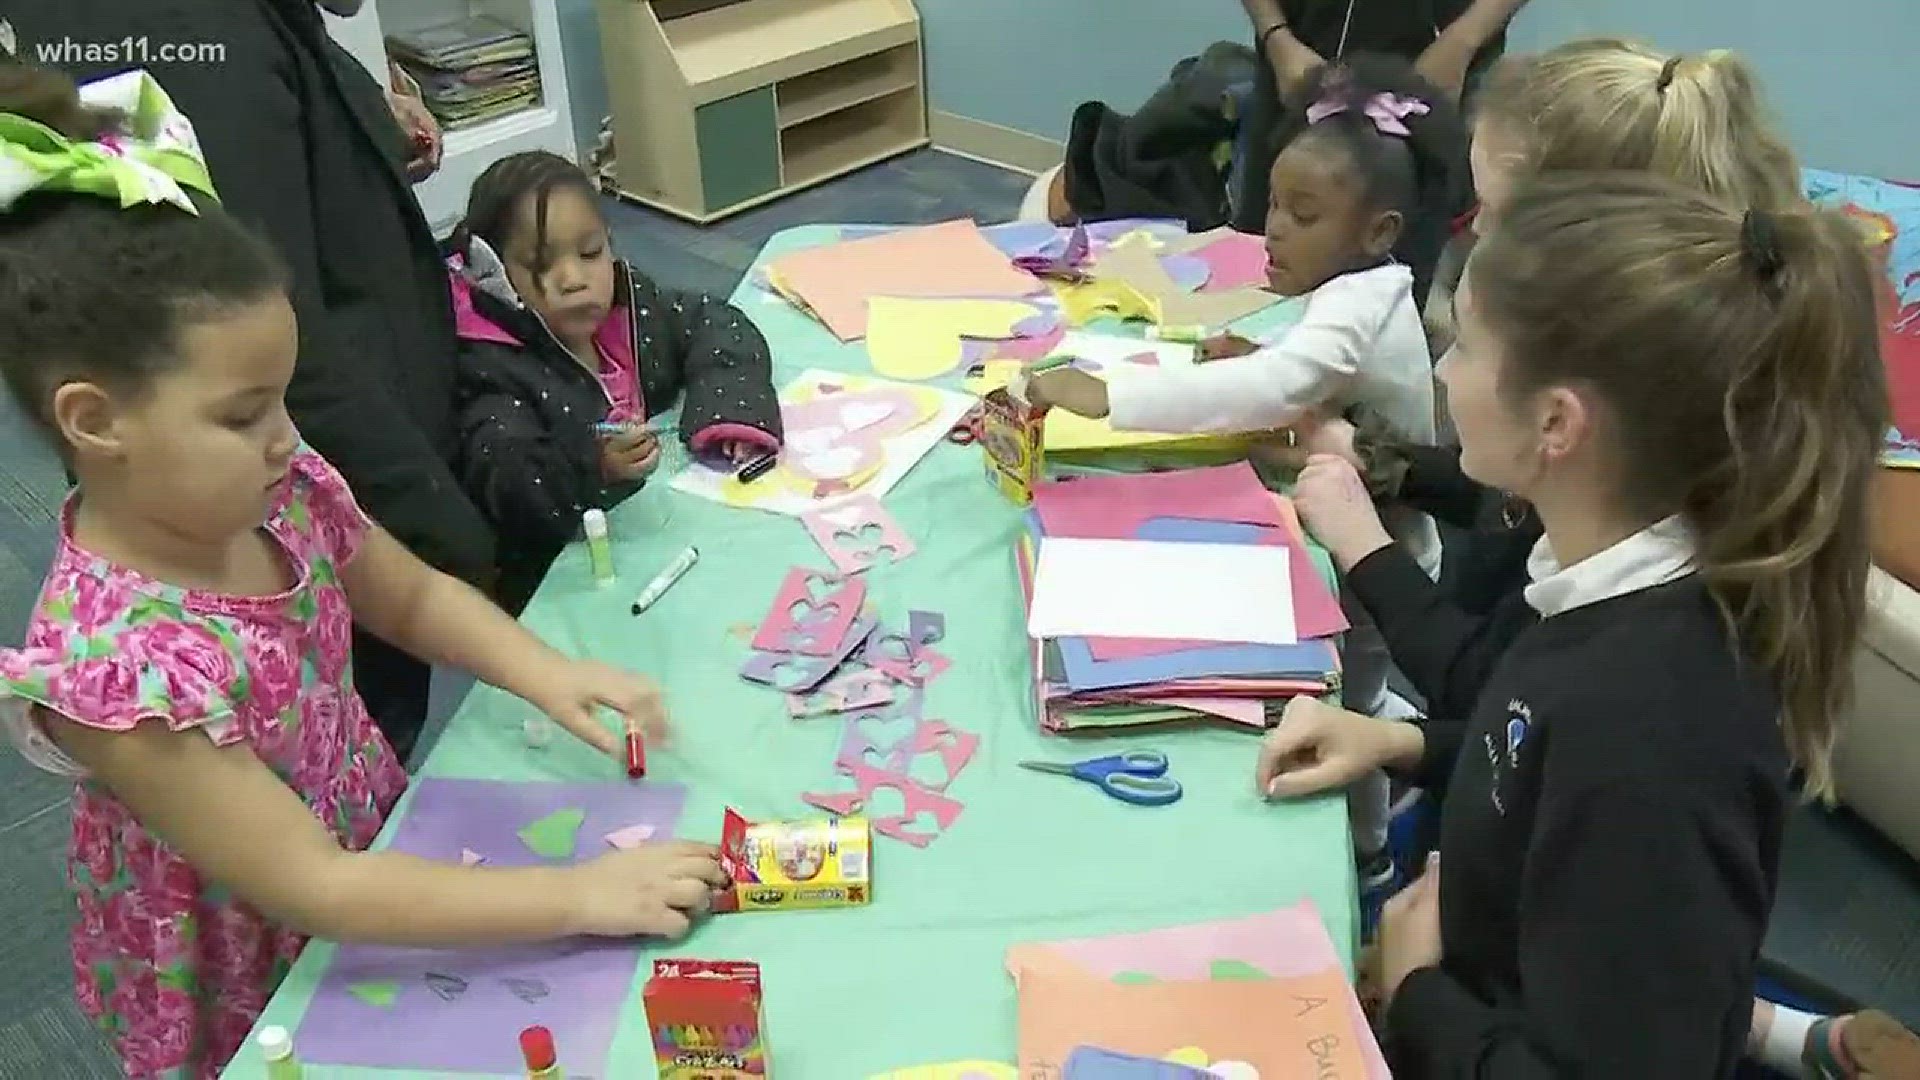 A group of local students celebrated Valentine's Day giving back to the community.